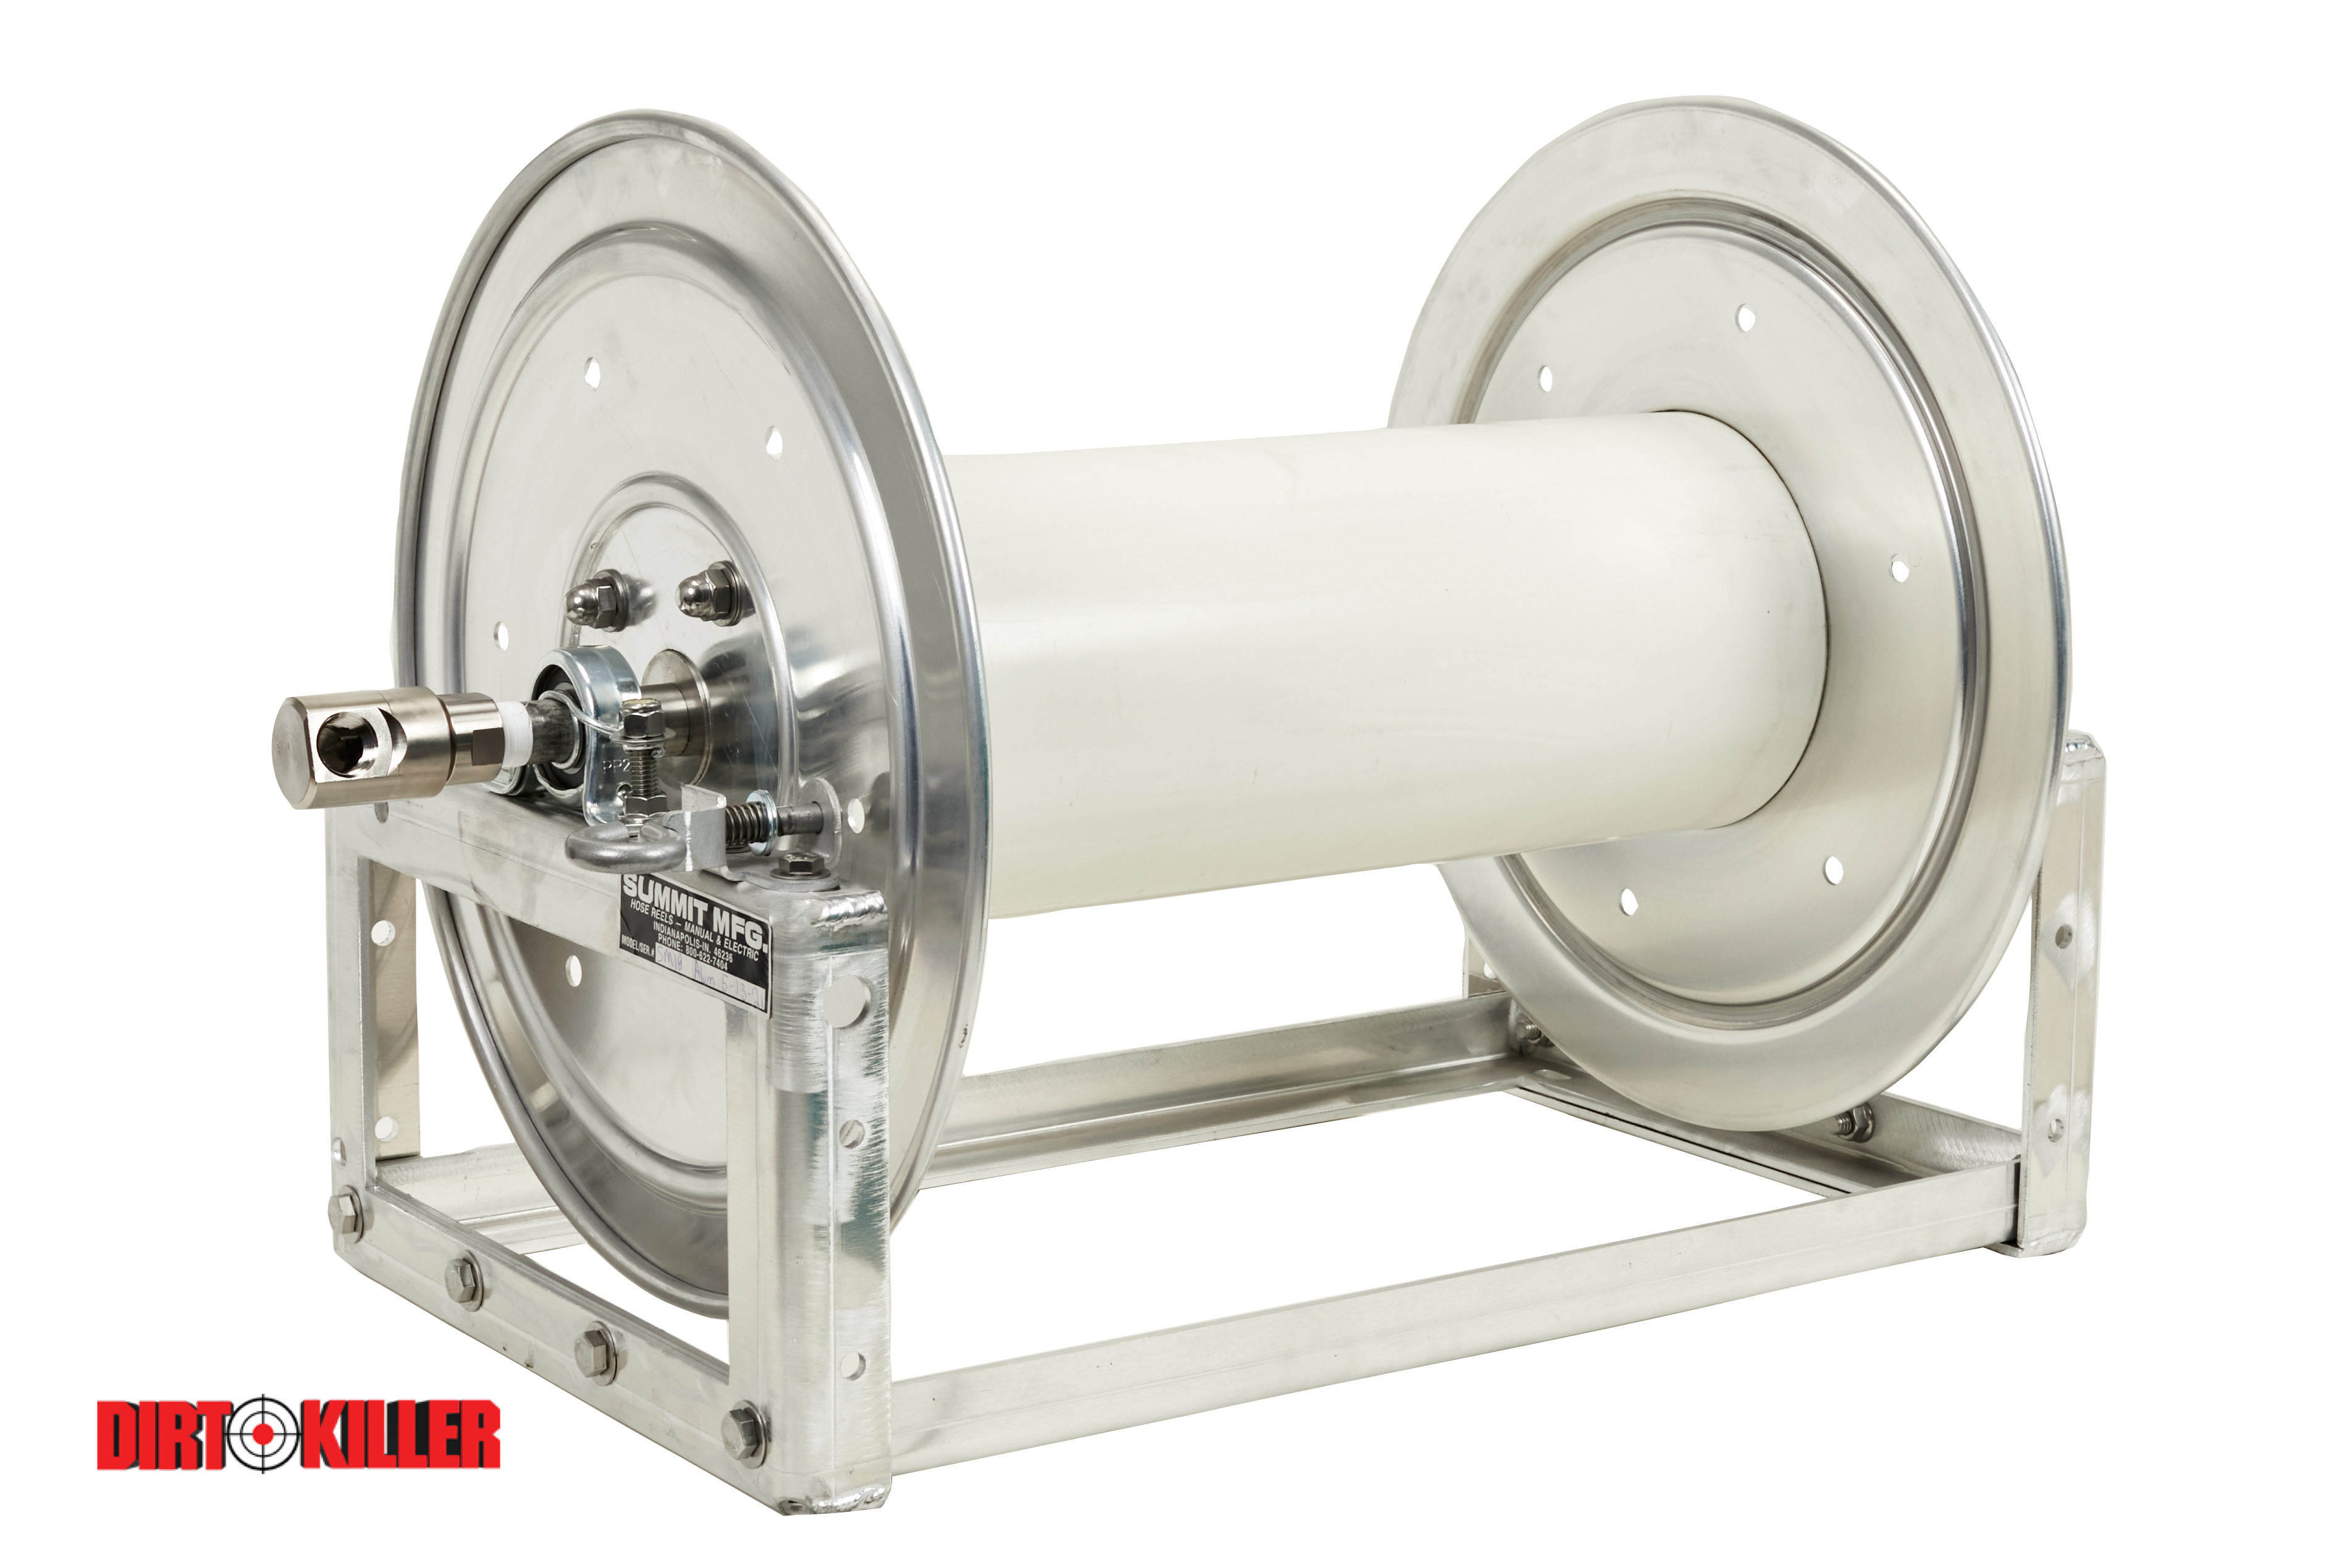 Summit Hose Reel SM18 Aluminum Externals With Stainless Manifold, Fits 350' of 1/2" Ag Hose-image_1